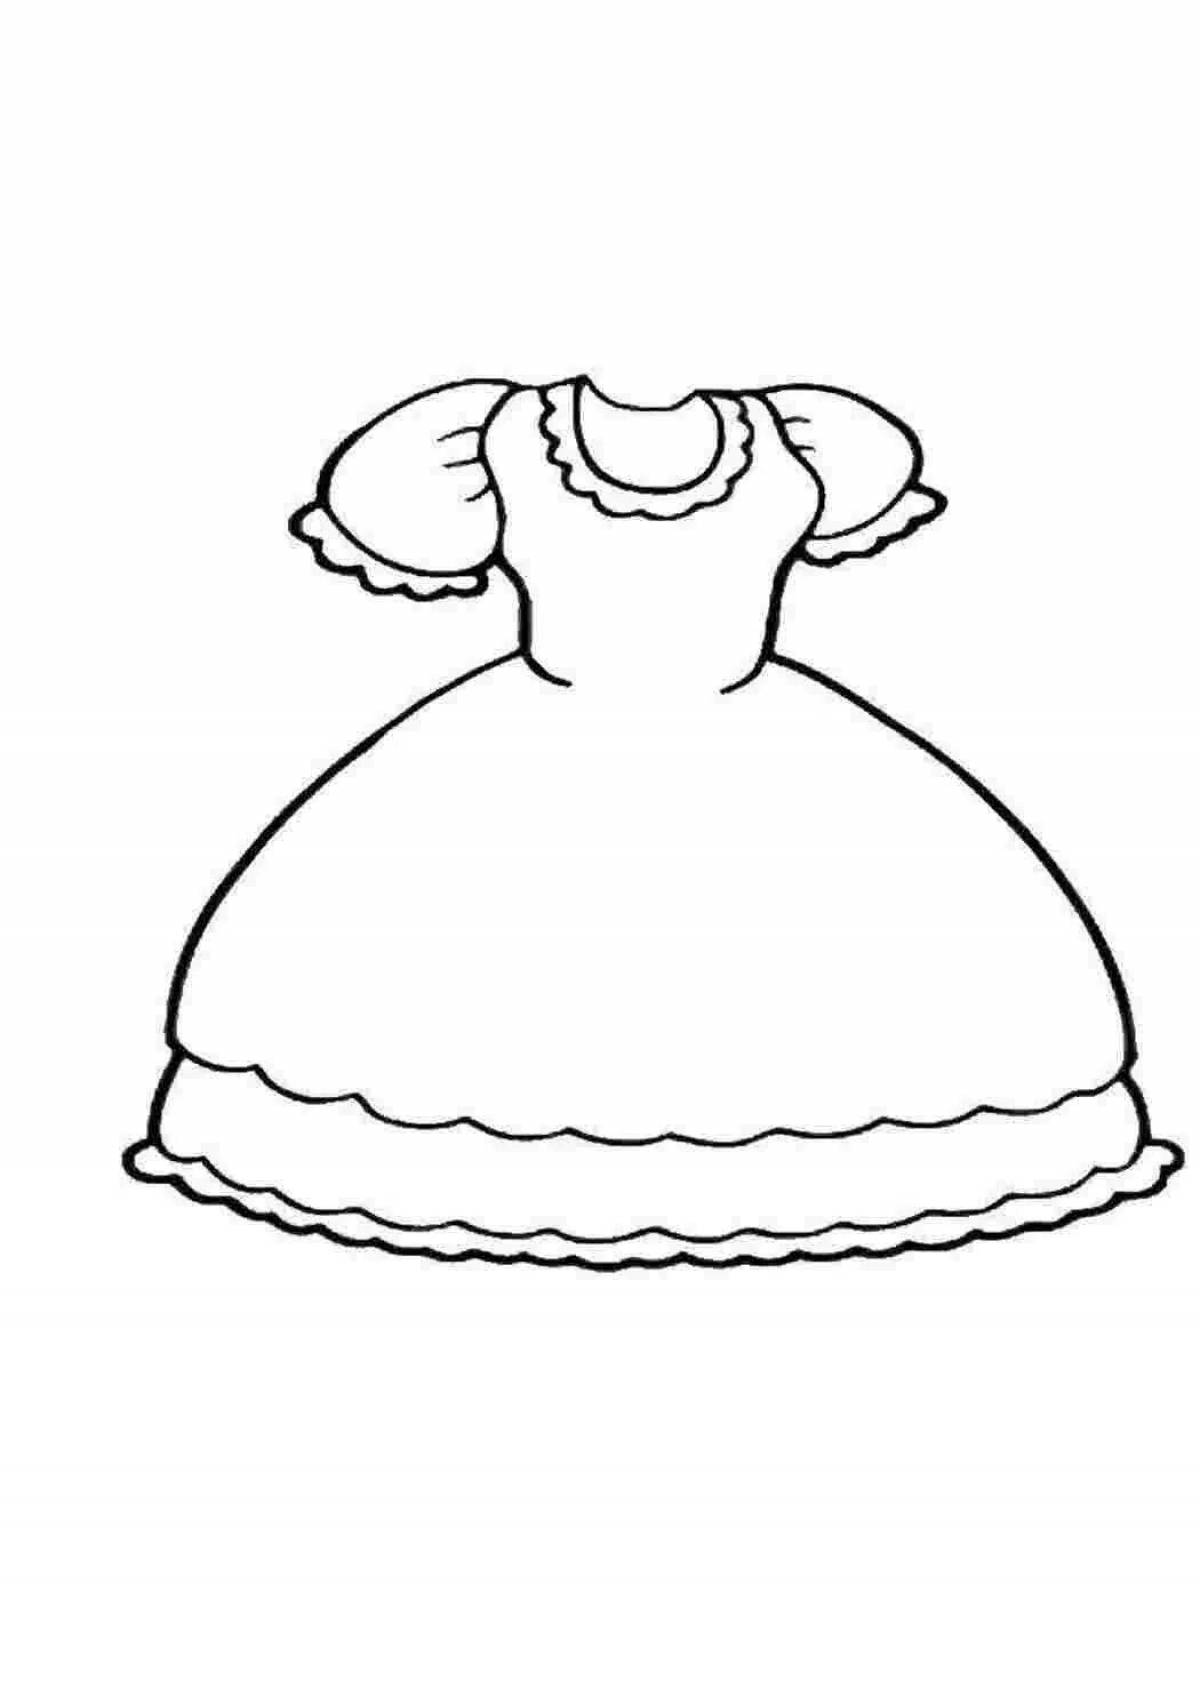 Colorful dress coloring book for kids